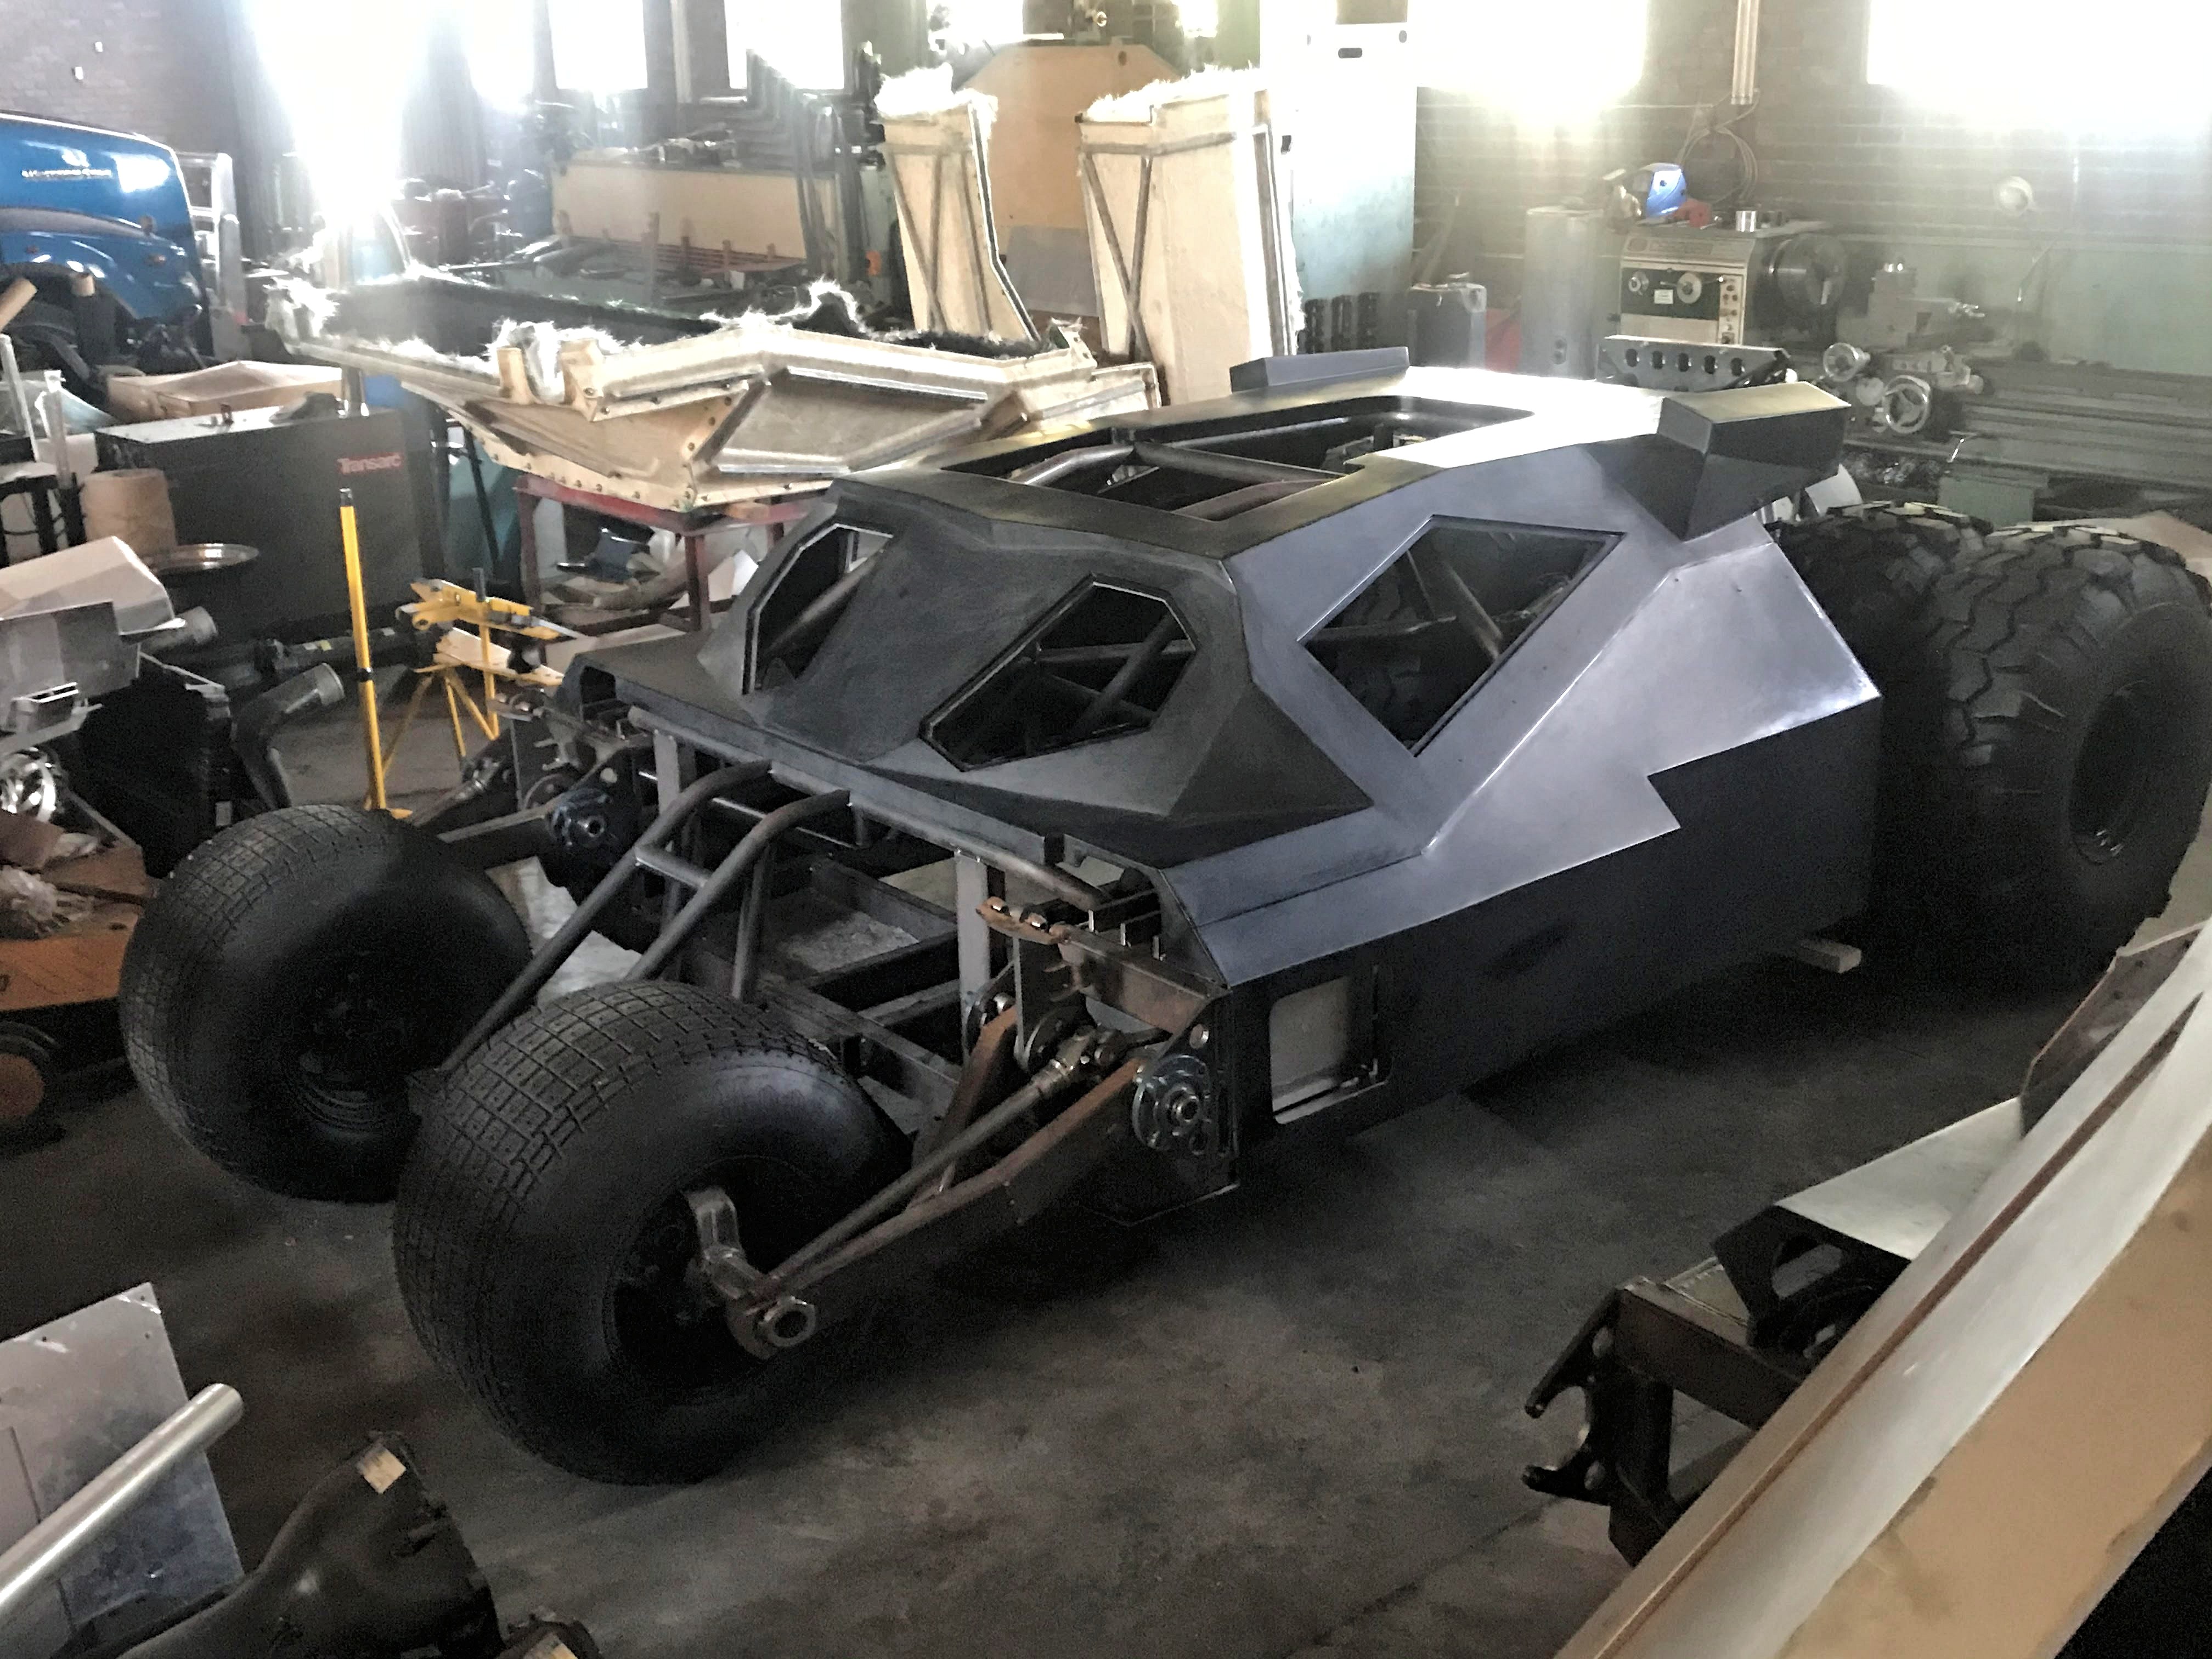 Replica of the Batman Movie Tumbler from the Dark Knight Trilogy in the workshop